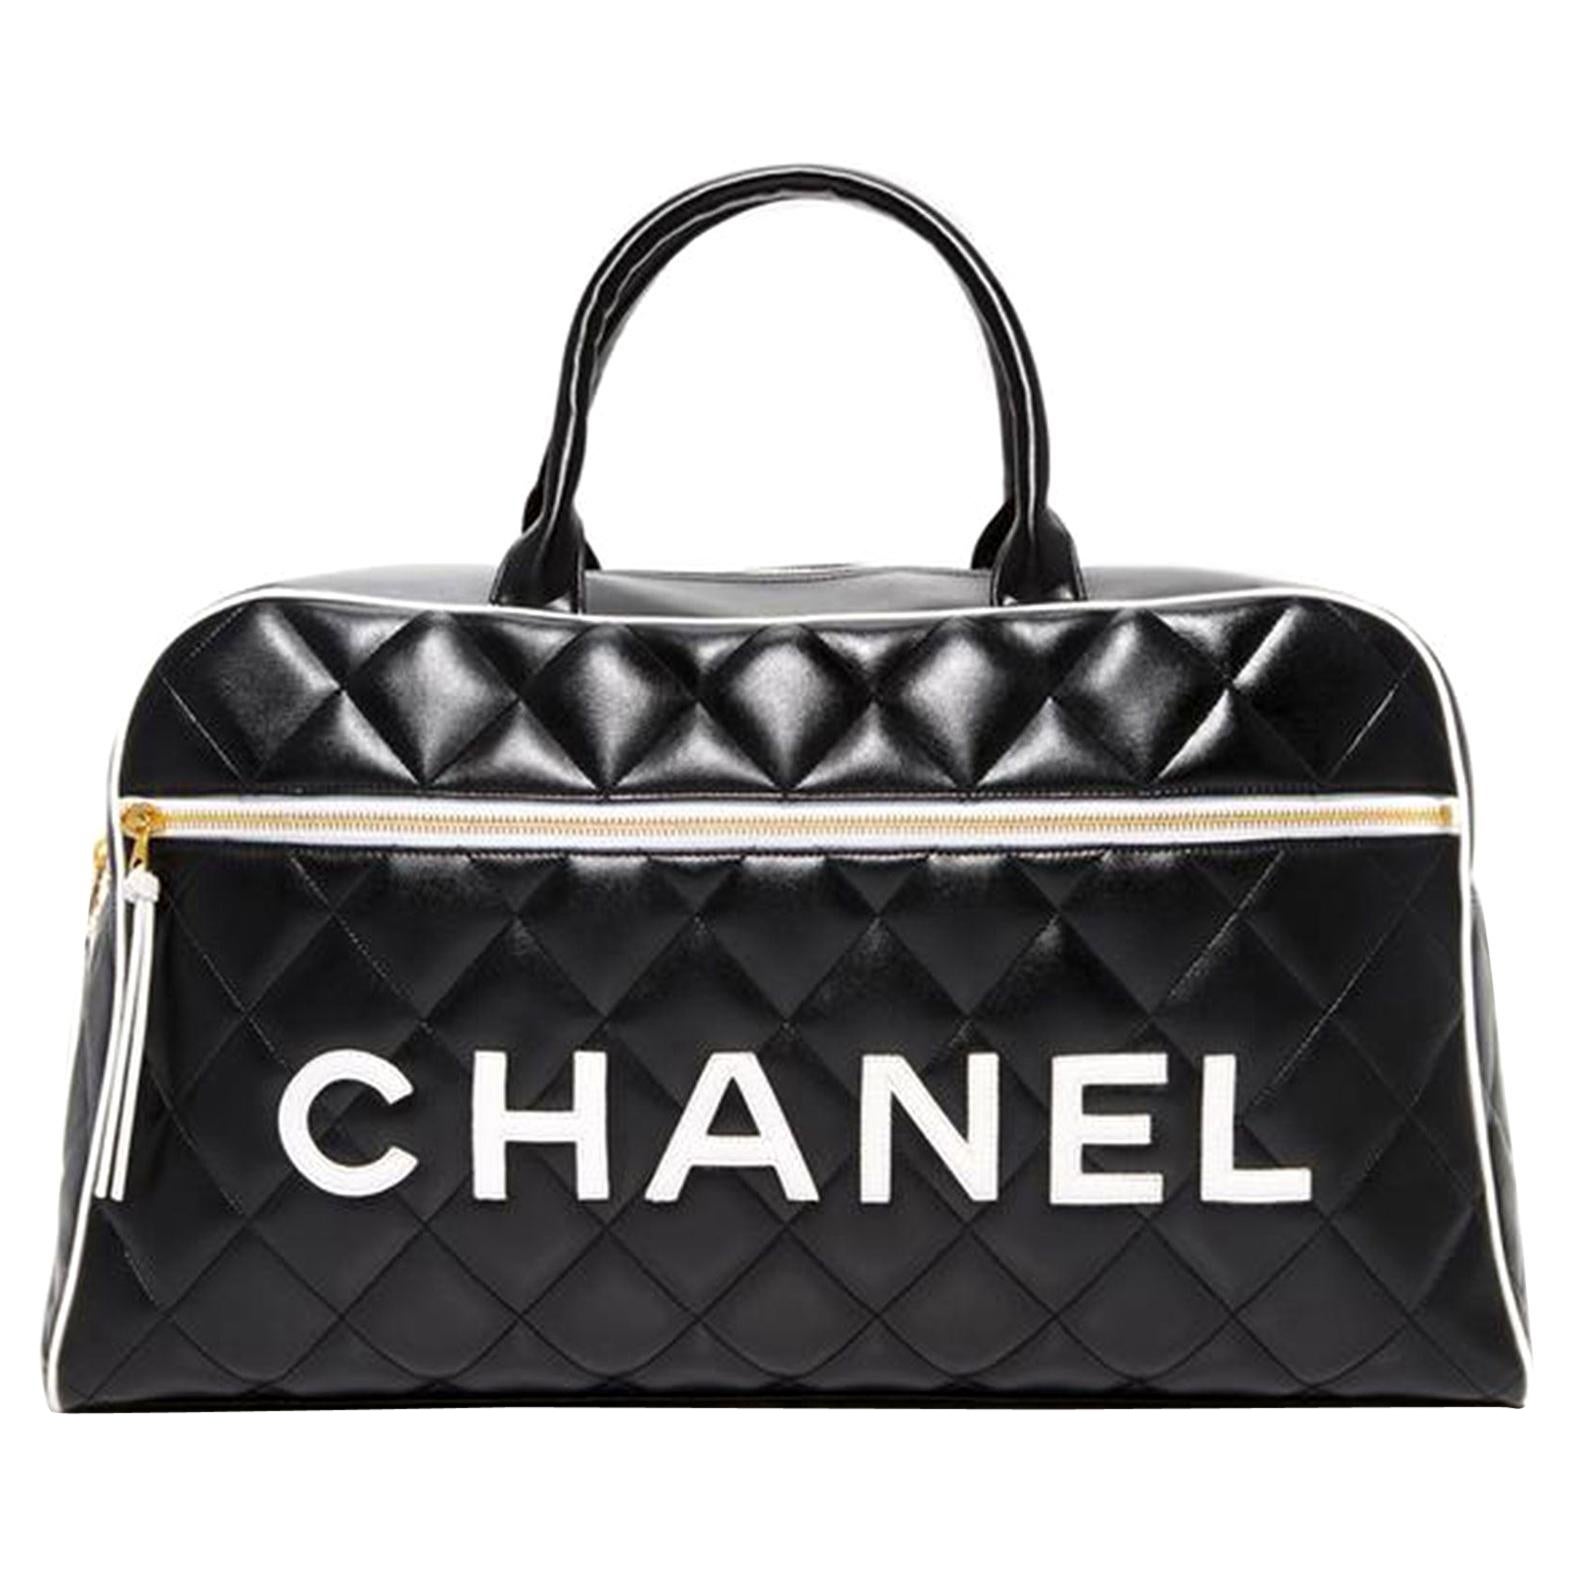 Chanel Limited Edition Vintage Bowling Bag Black and White